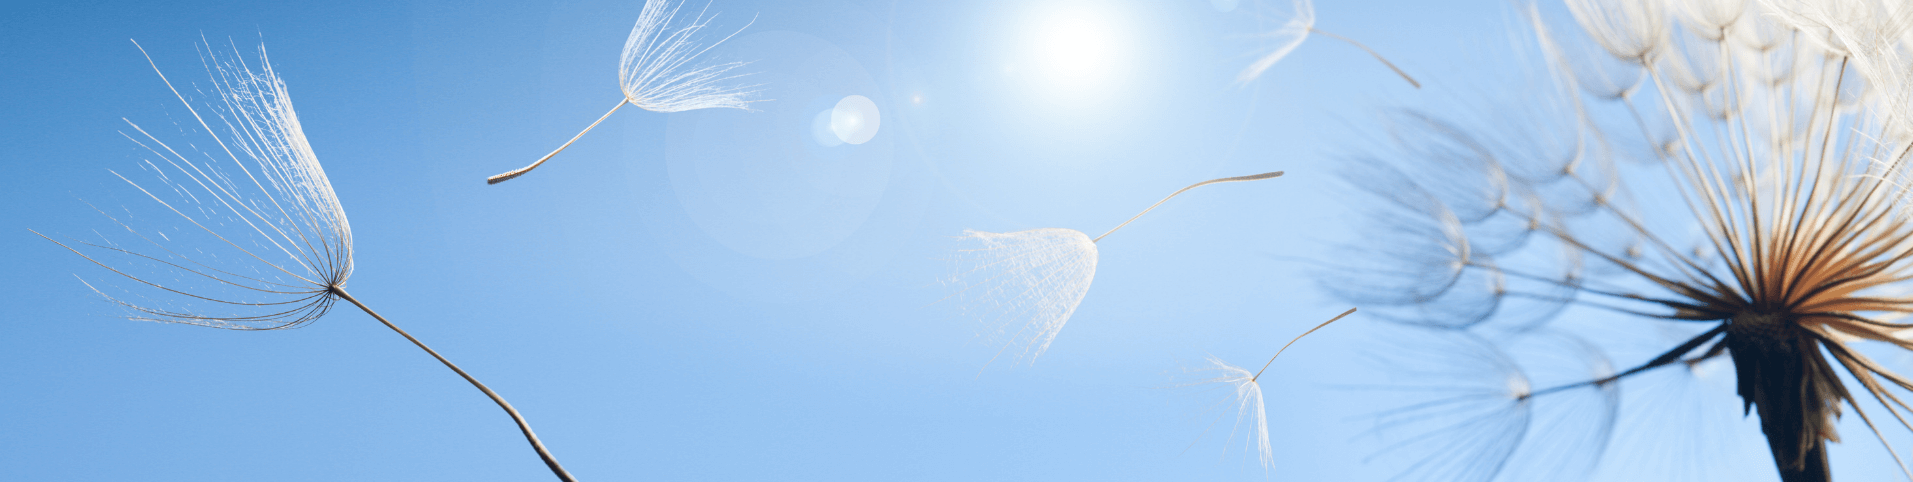 Blue Sky with Dandelion seeds being blown away 